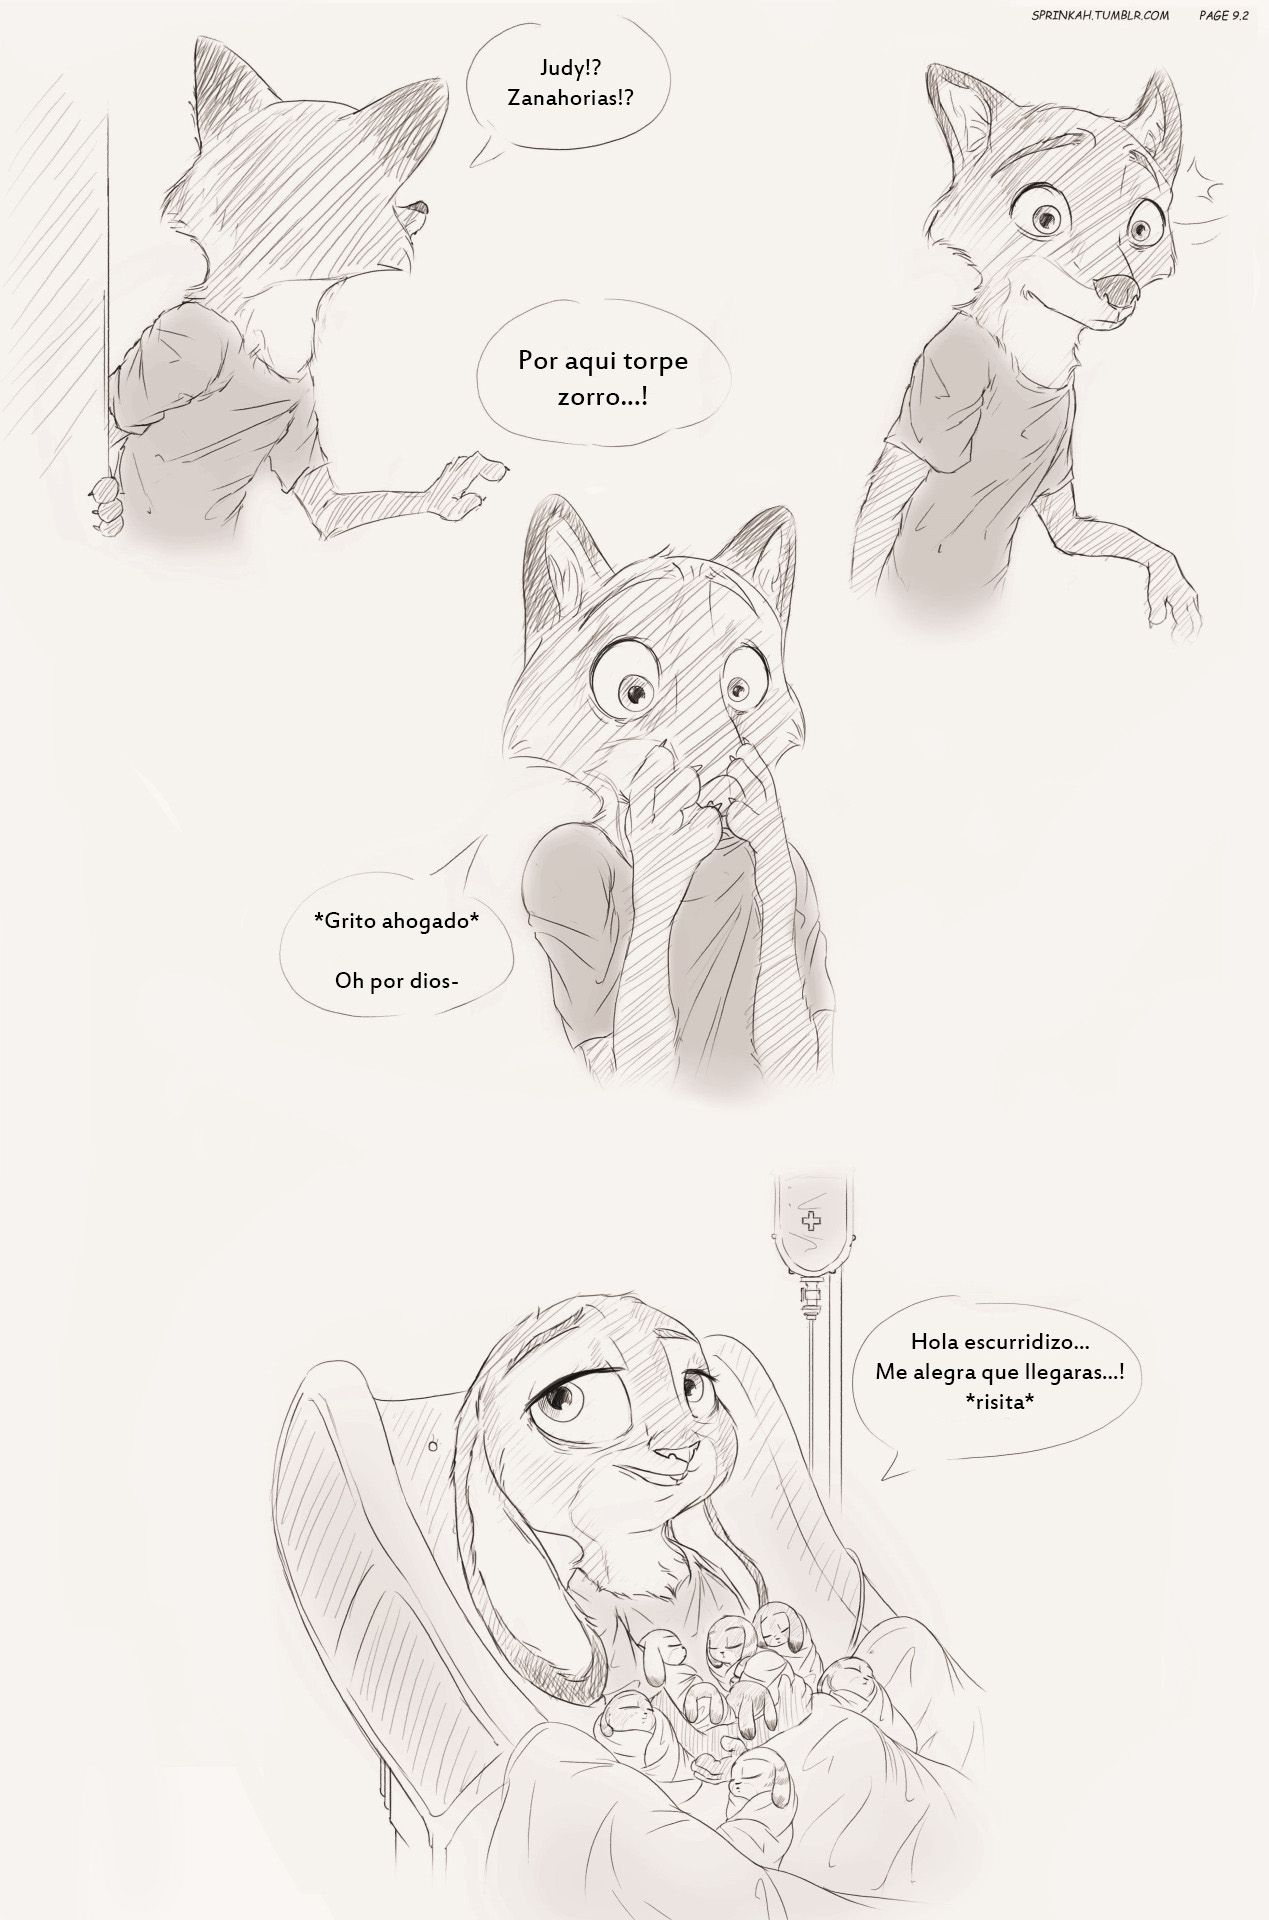 [Sprinkah] This is what true love looks like (Zootopia) (Spanish) (On Going) [Landsec] http://sprinkah.tumblr.com/ 15